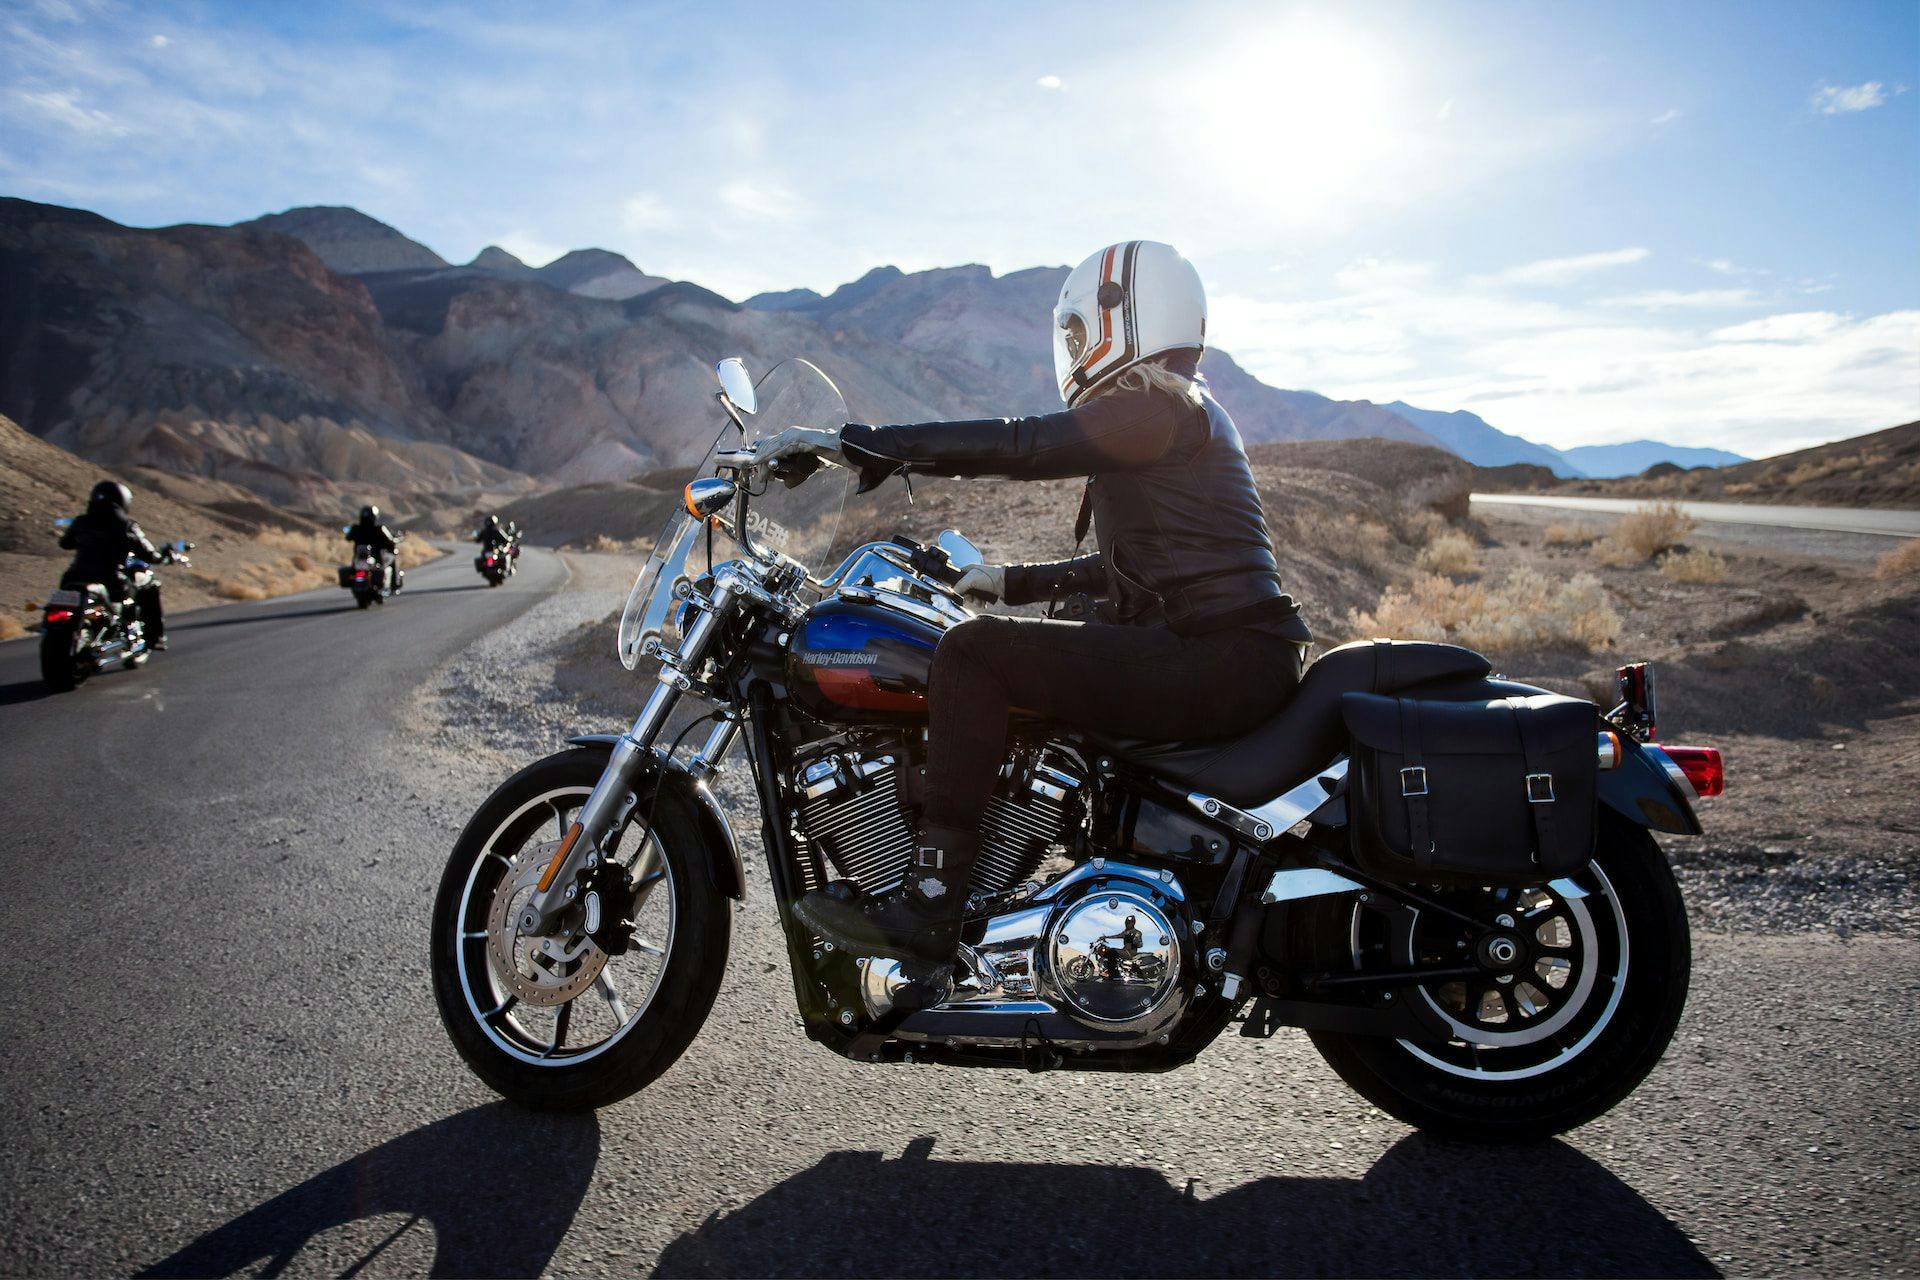 Motorcycle Rentals Near Me: 8 Tips In Finding The Best Deal